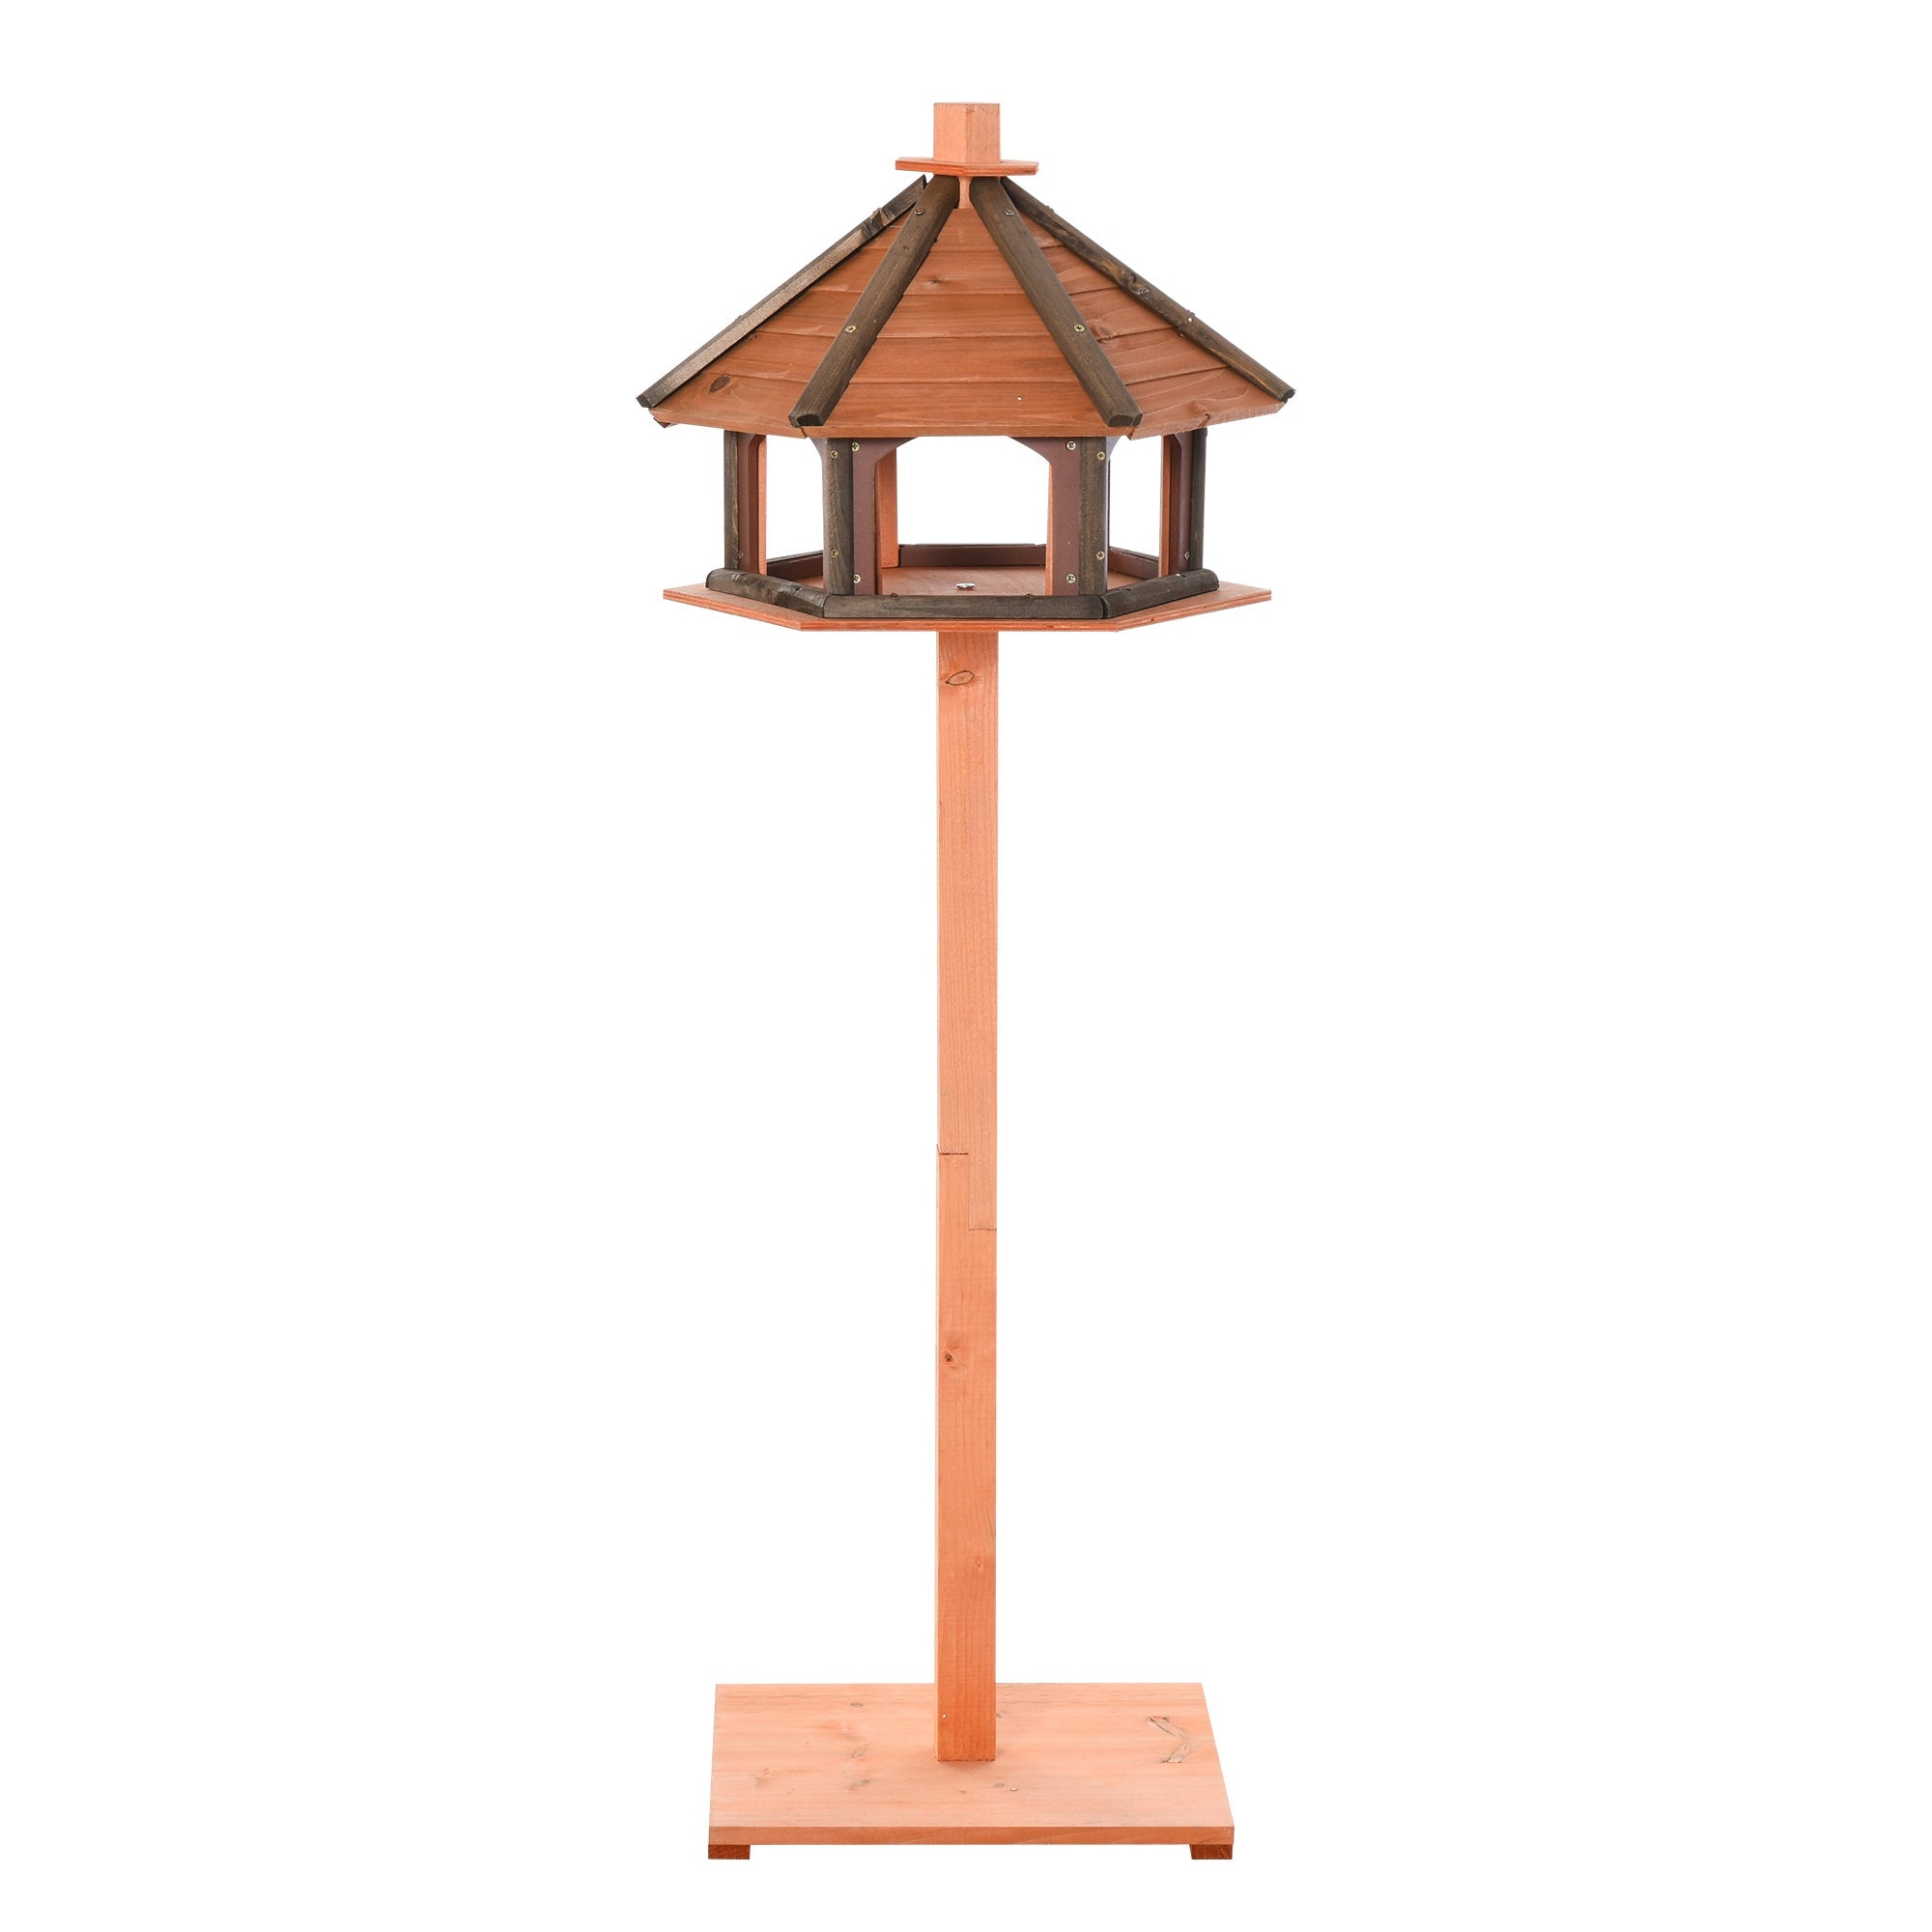 Outdoor Wooden Wild Bird Feeder Stand with Protective Roof - 130cm, PawHut,